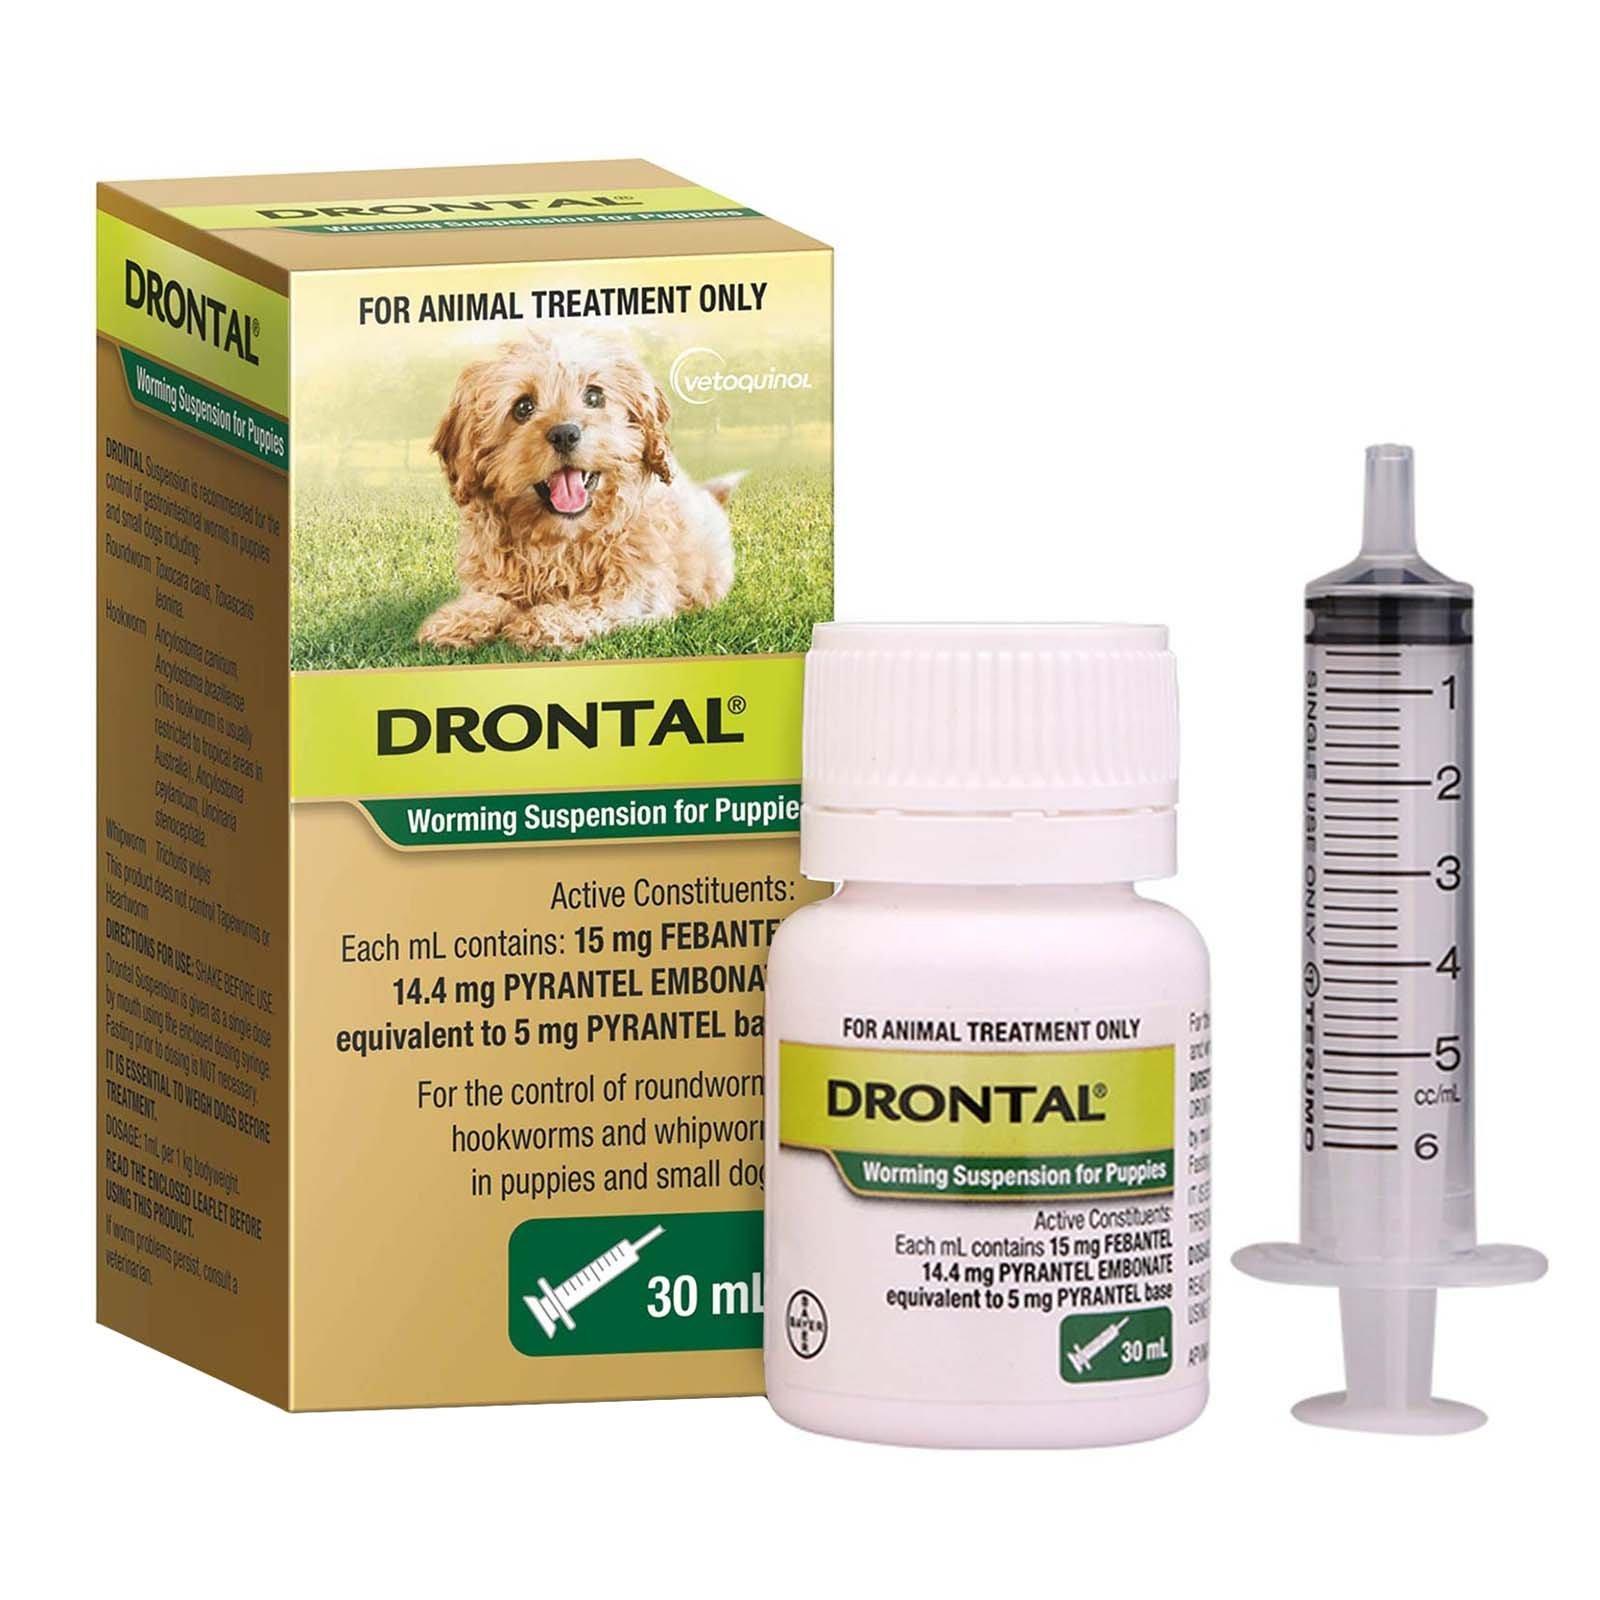 Drontal Allwormer Puppy Worming Suspension 30 mL